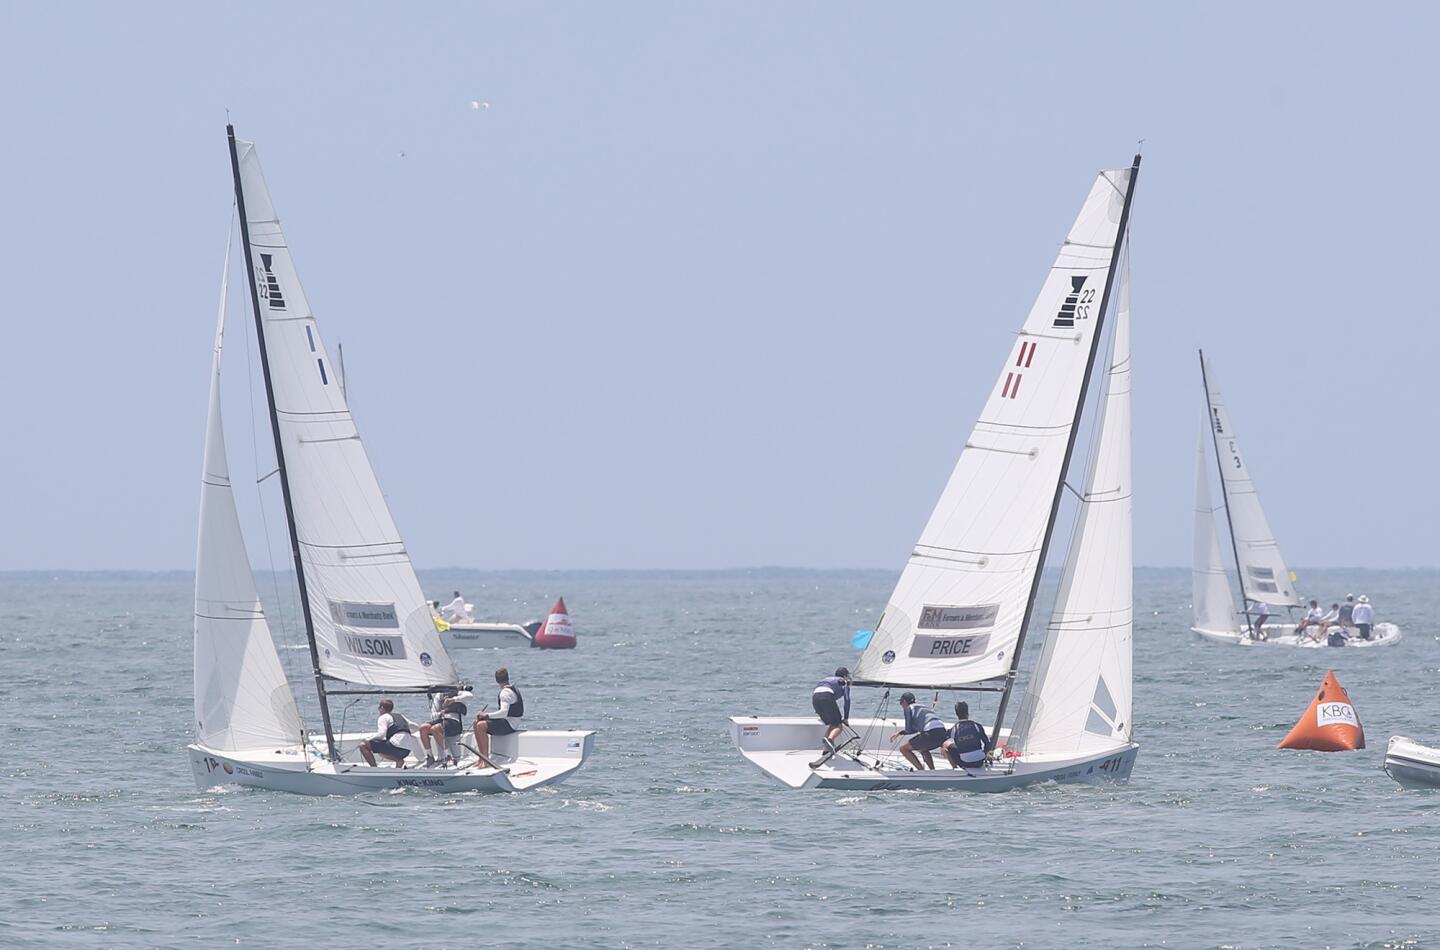 Crews from Australia and New Zealand, from left, race in the Balboa Yacht Club's GovernorÕs Cup south of the Newport Pier on Thursday.